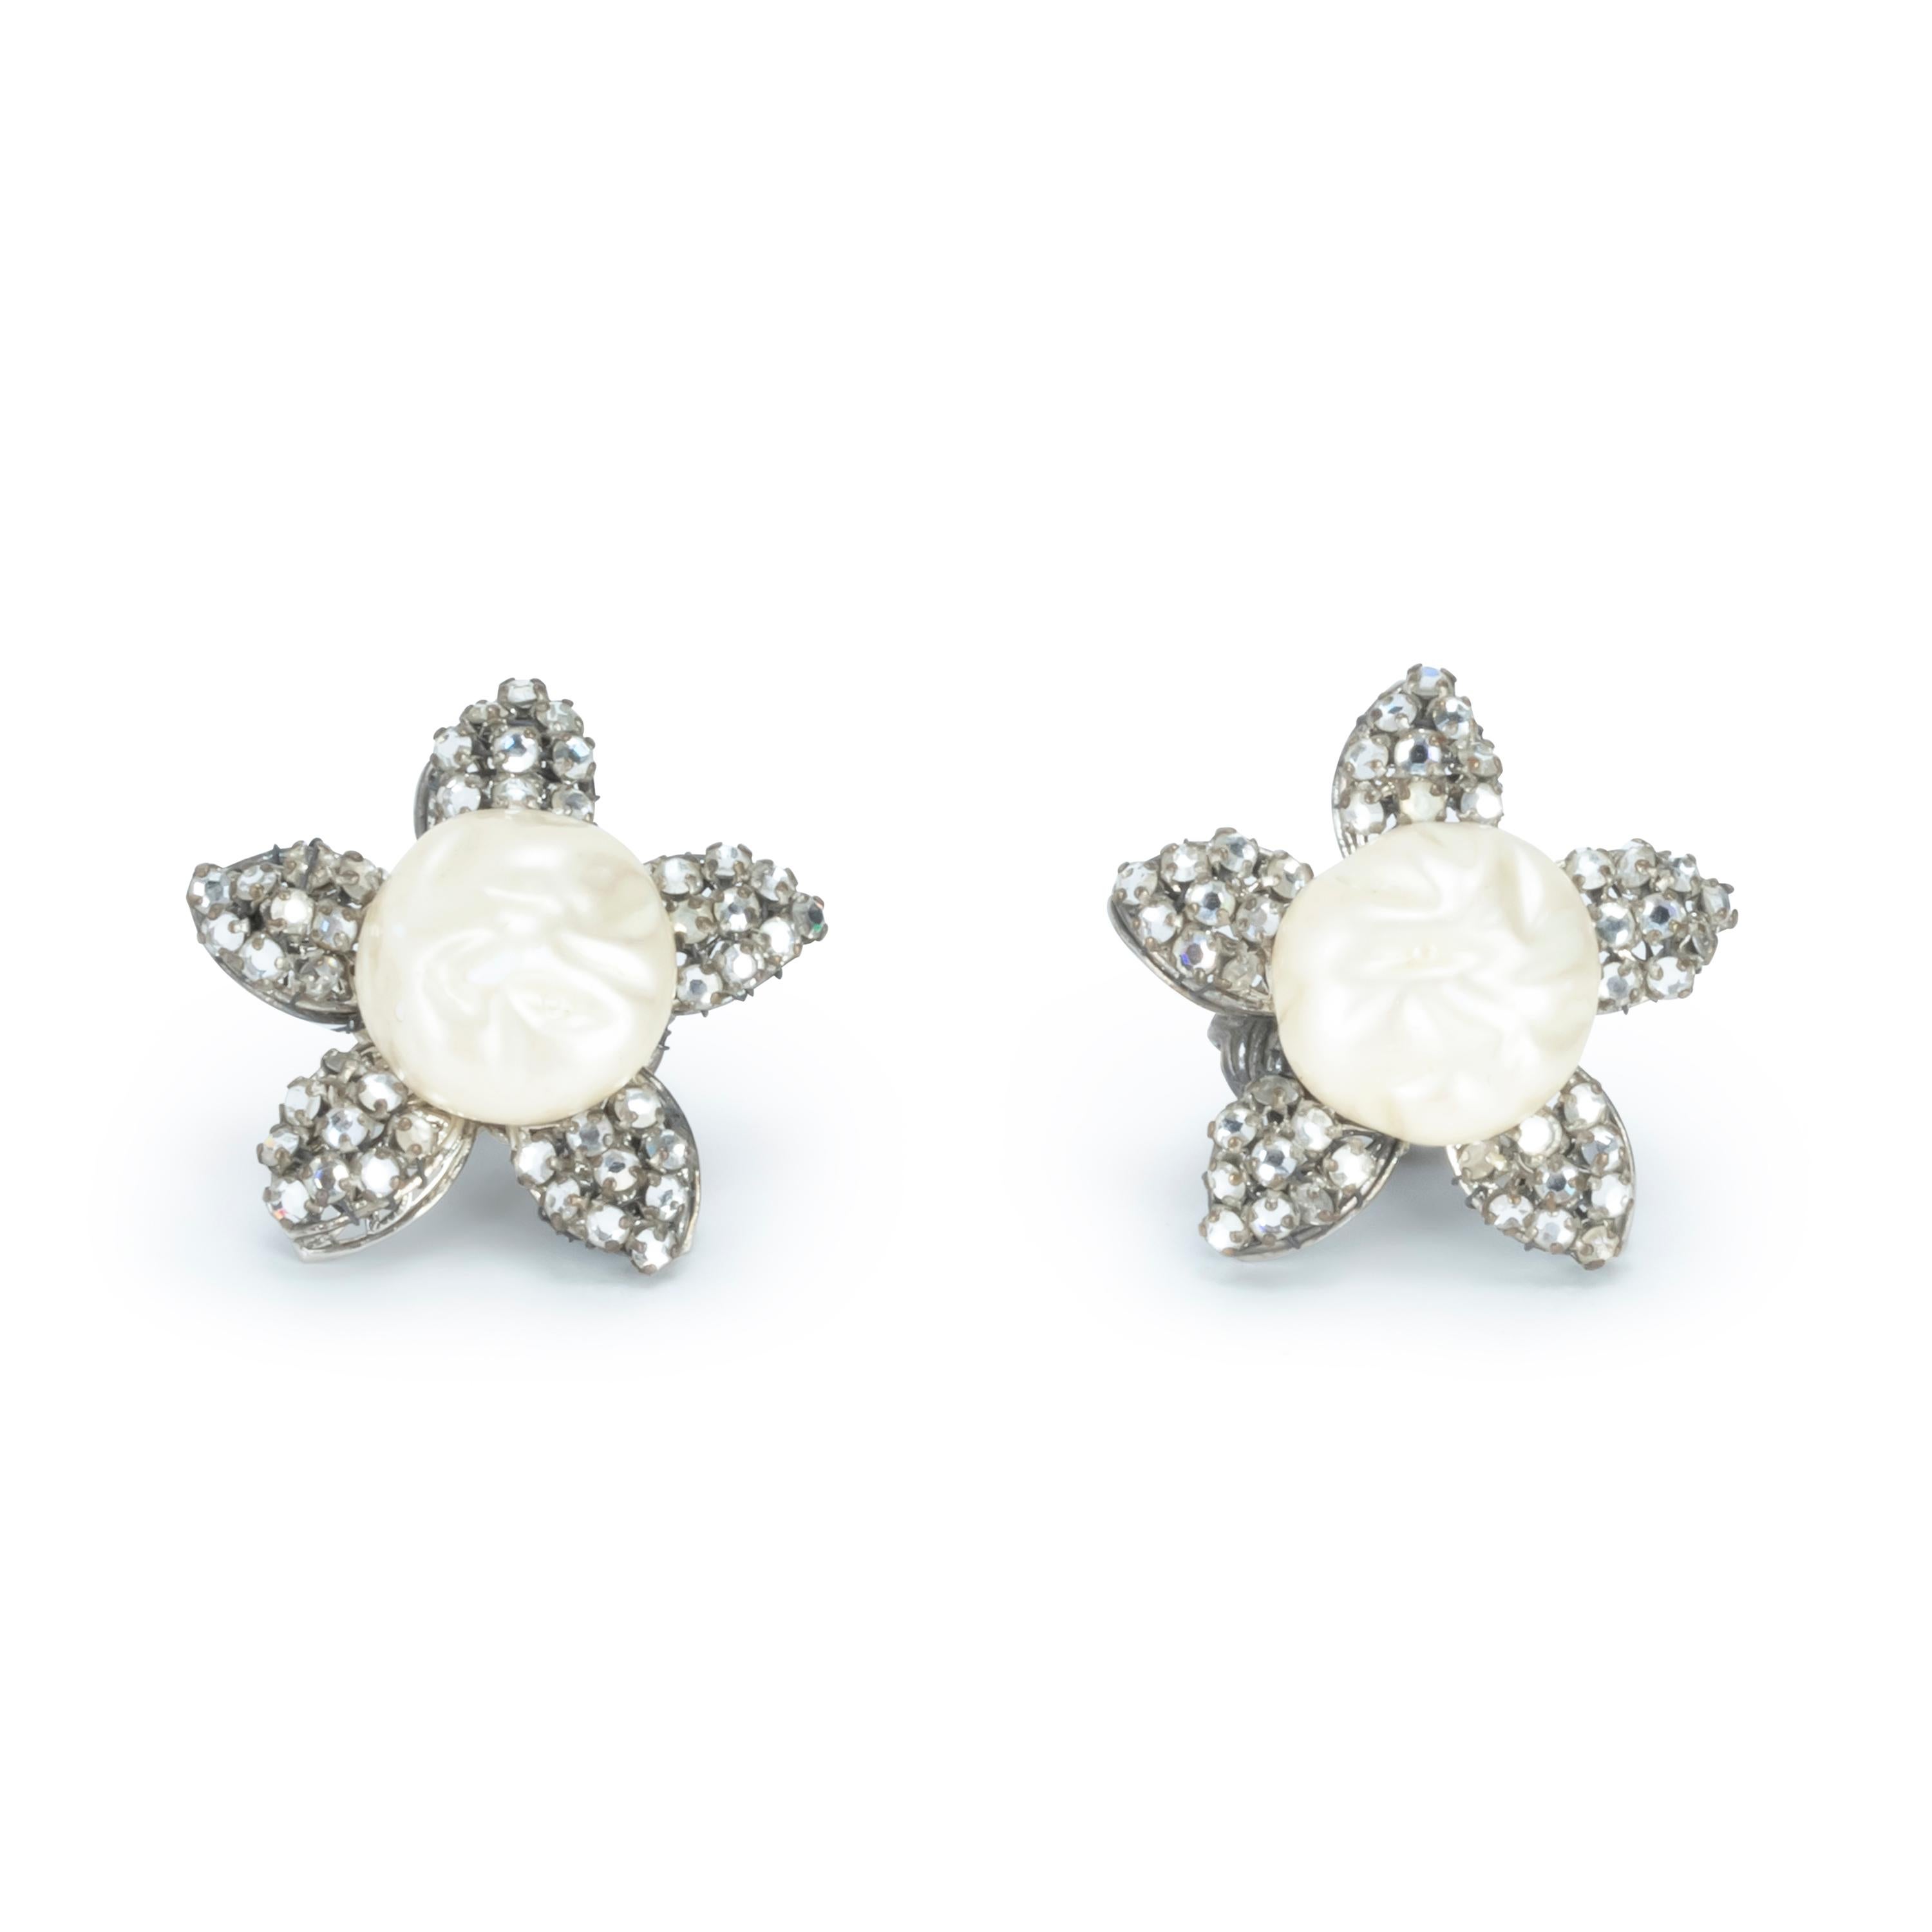 Vintage elegant and chic Flower Pearl earrings 
A classic 1960s look that is timeless, the earrings are clip ons. In fantastic condition.
Zircons are hand set pave style with button pearls.
The item is sIgned by an unknown artist and looks like it